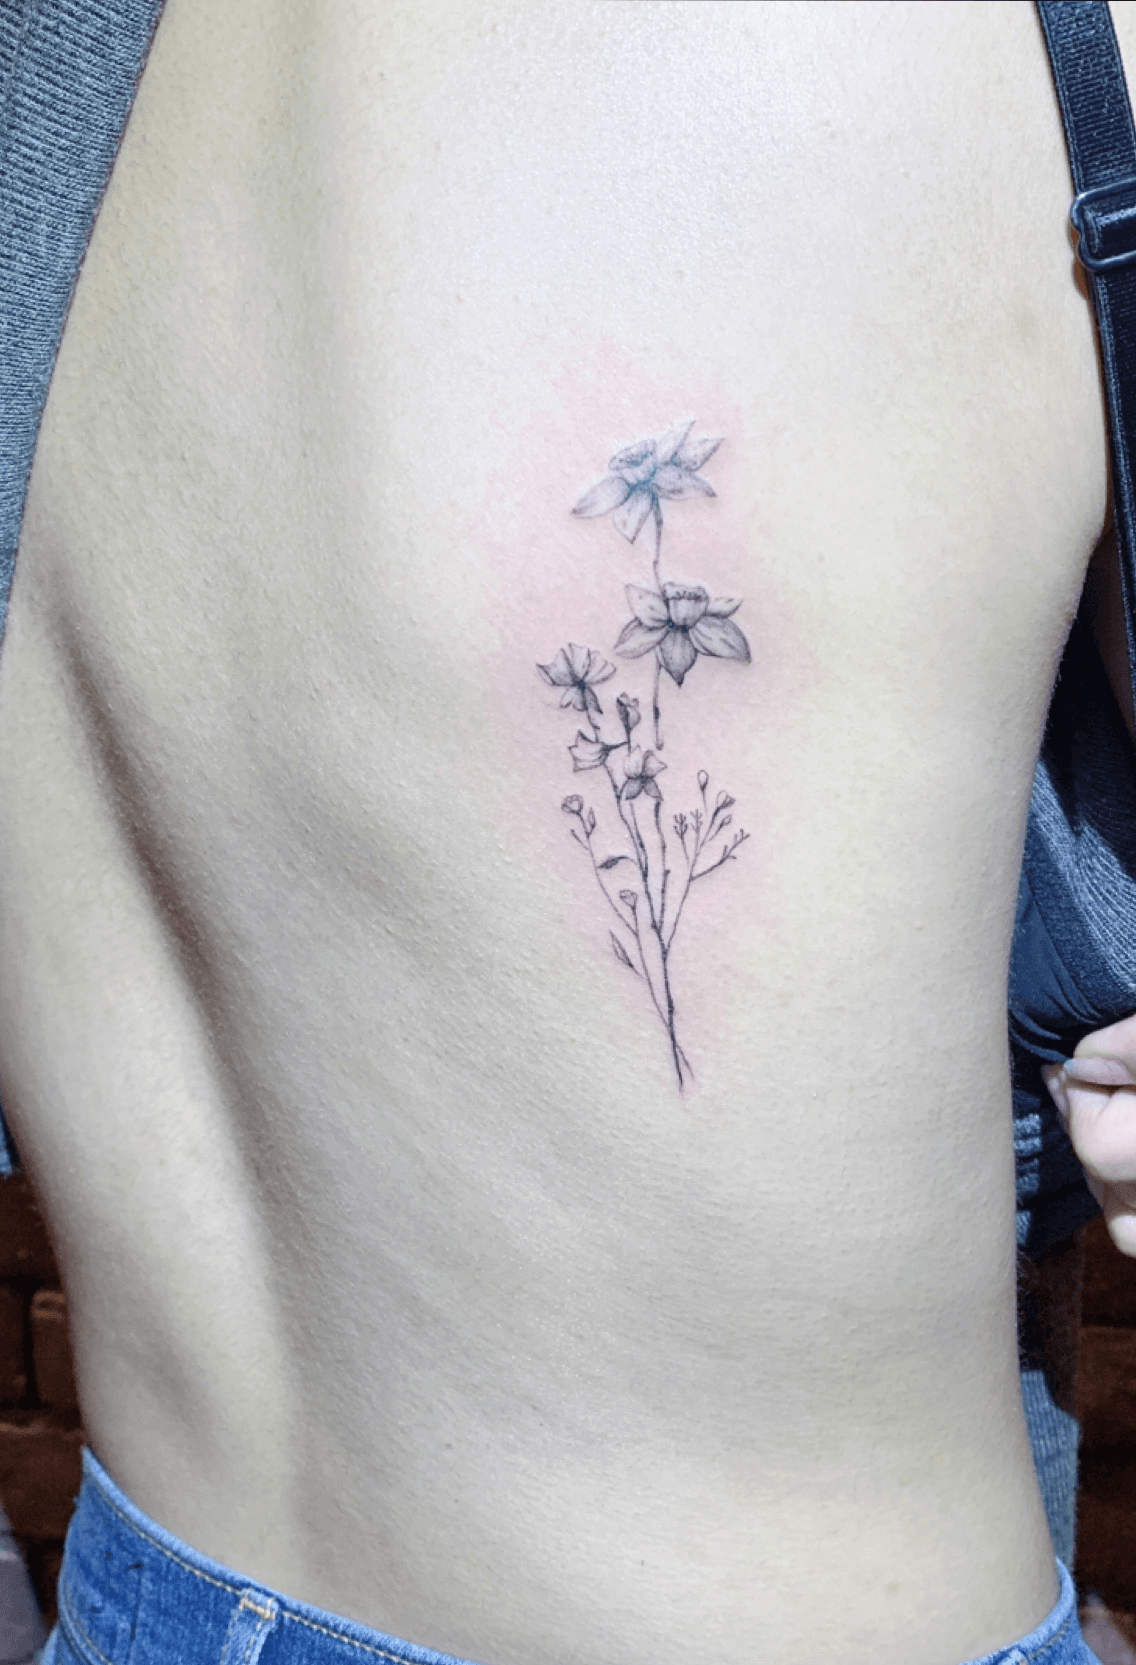 Daffodil flower tattoos 23 designs that will inspire you to create your  own unique look   Онлайн блог о тату IdeasTattoo